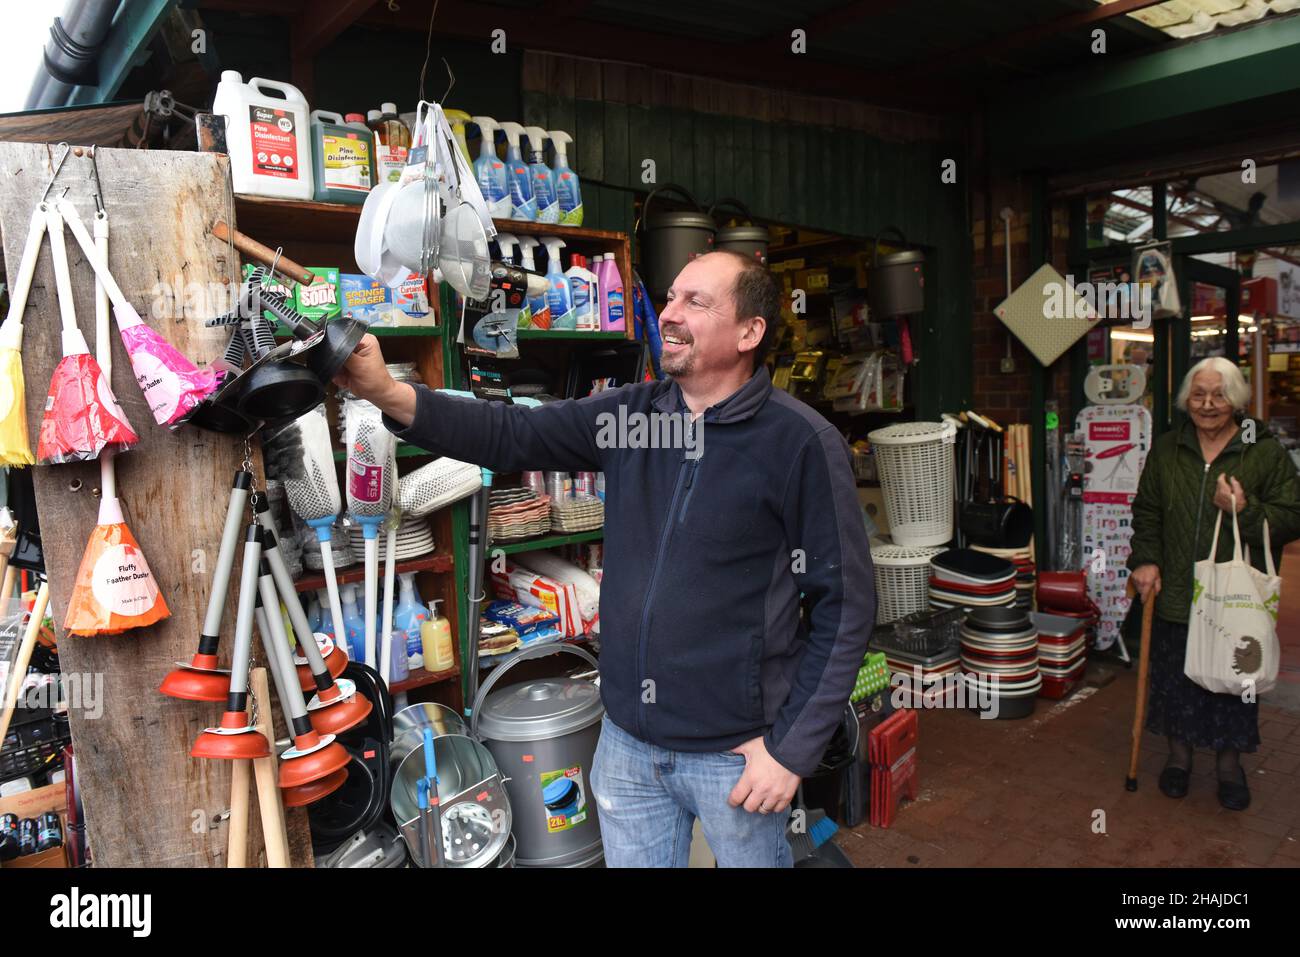 Wellington Market in October 2019. Mark Eardley the ironmonger and household wares stall called Aladdin's Cave. Mark has been trading at the market since 1984. Market Traders trader stallholder stall holder Stock Photo